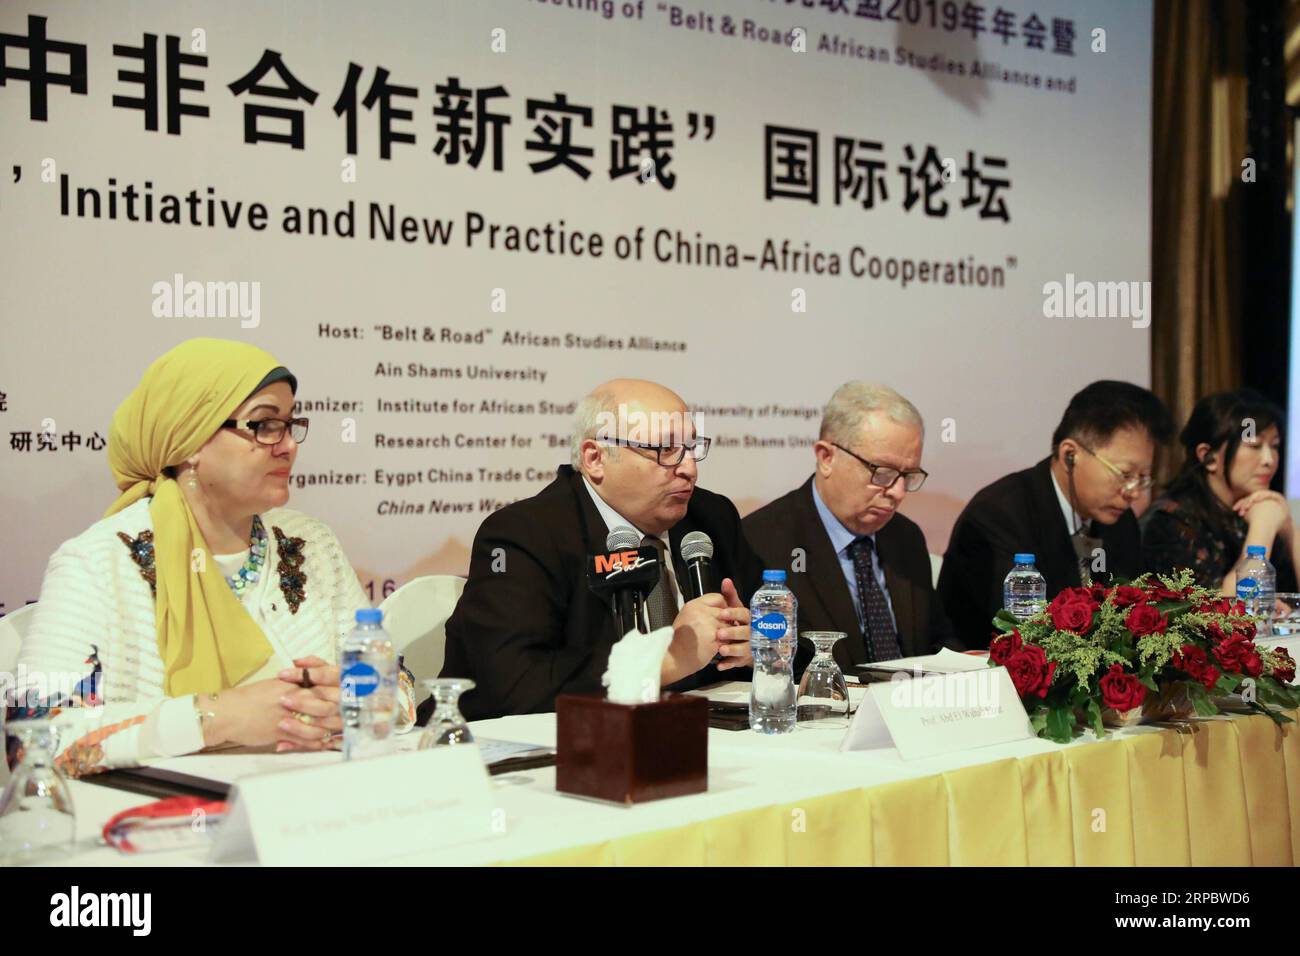 (190617) -- CAIRO, June 17, 2019 (Xinhua) -- President of Ain Shams University Abdel Wahab Ezzat (2nd L) speaks during the International Forum of Belt and Road Initiative (BRI) and New Practices of China-Africa Cooperation in Cairo, Egypt on June 16, 2019. The two-day event kicked off Sunday in Cairo. Some 80 people attended the conference including government officials, entrepreneurs, experts, scholars and researchers from Nigeria, Kenya, China and Egypt. (Xinhua/Li Binian) EGYPT-CAIRO-CHINA-AFRICA-BRI-FORUM PUBLICATIONxNOTxINxCHN Stock Photo